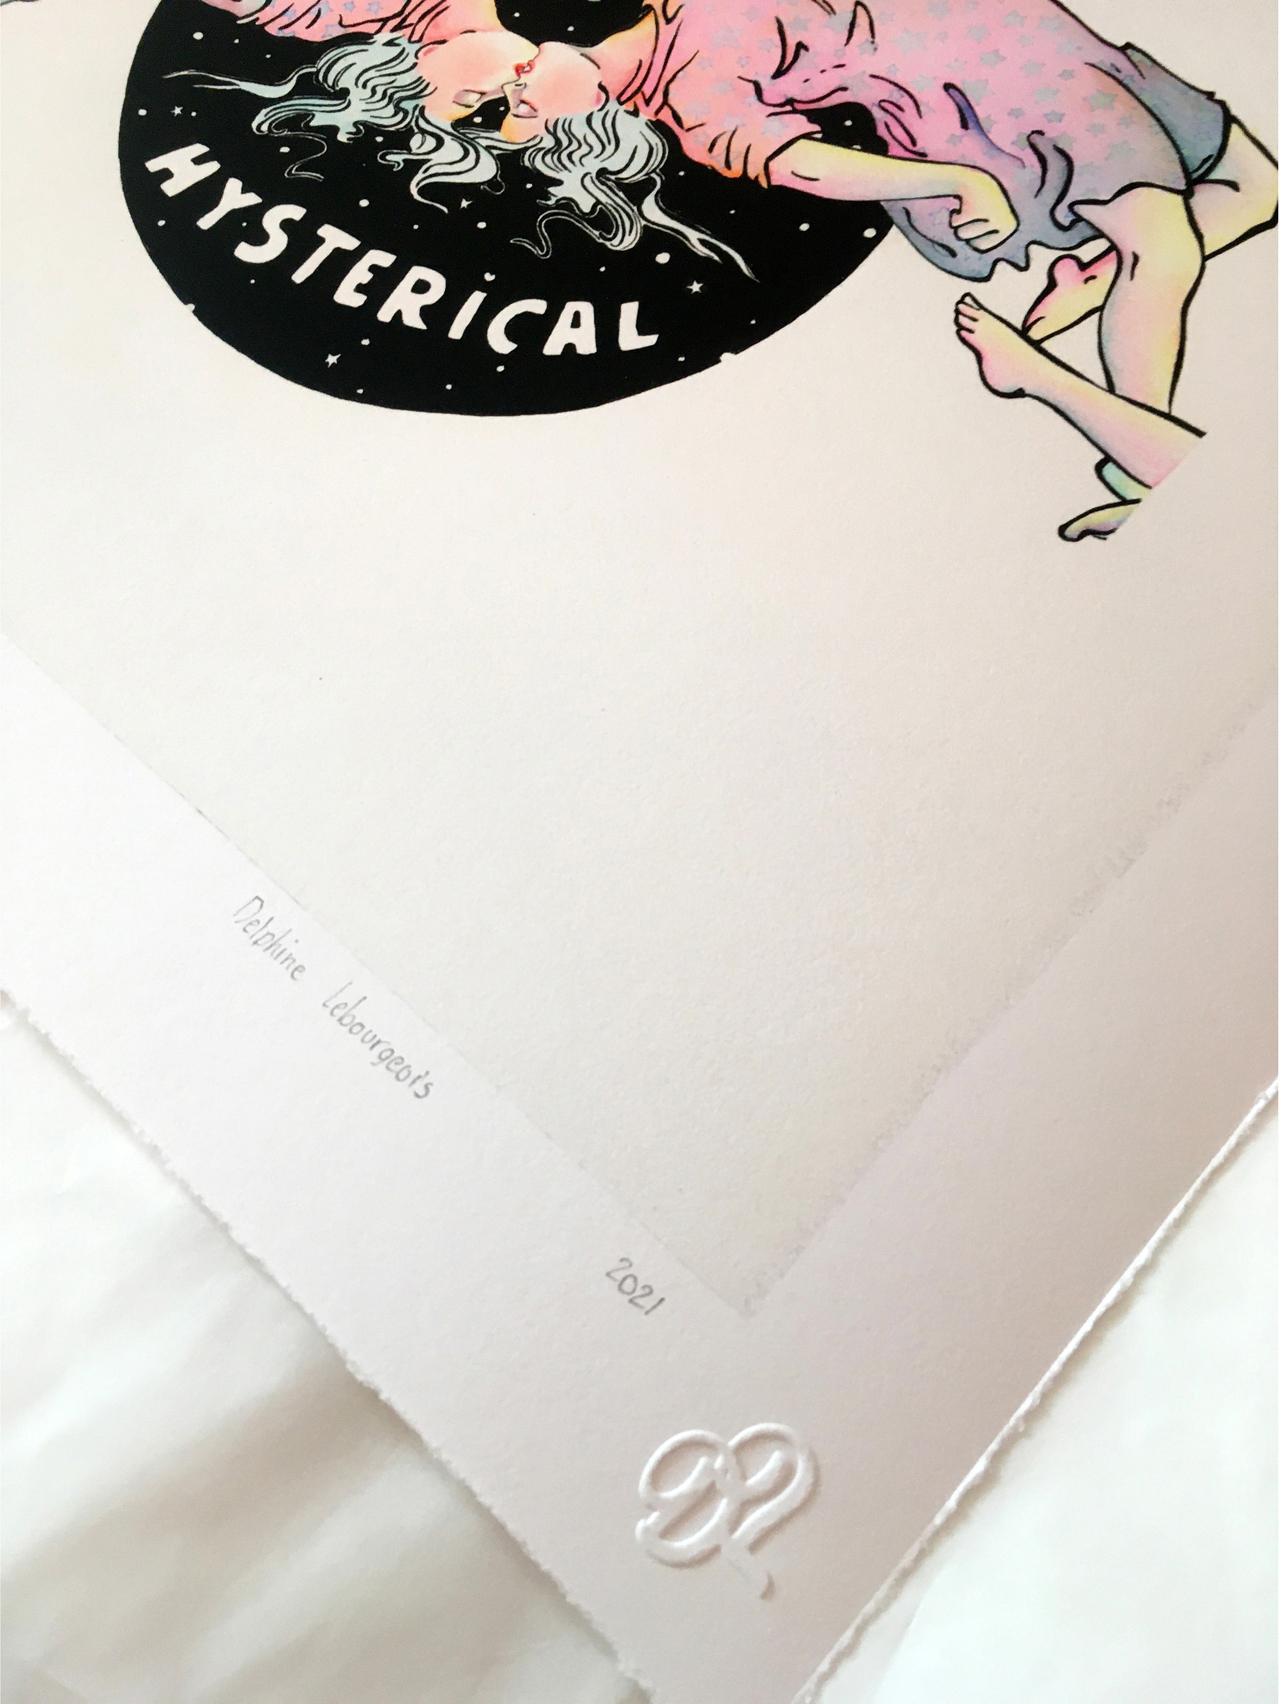 All Hysterical - Print by Delphine Lebourgeois